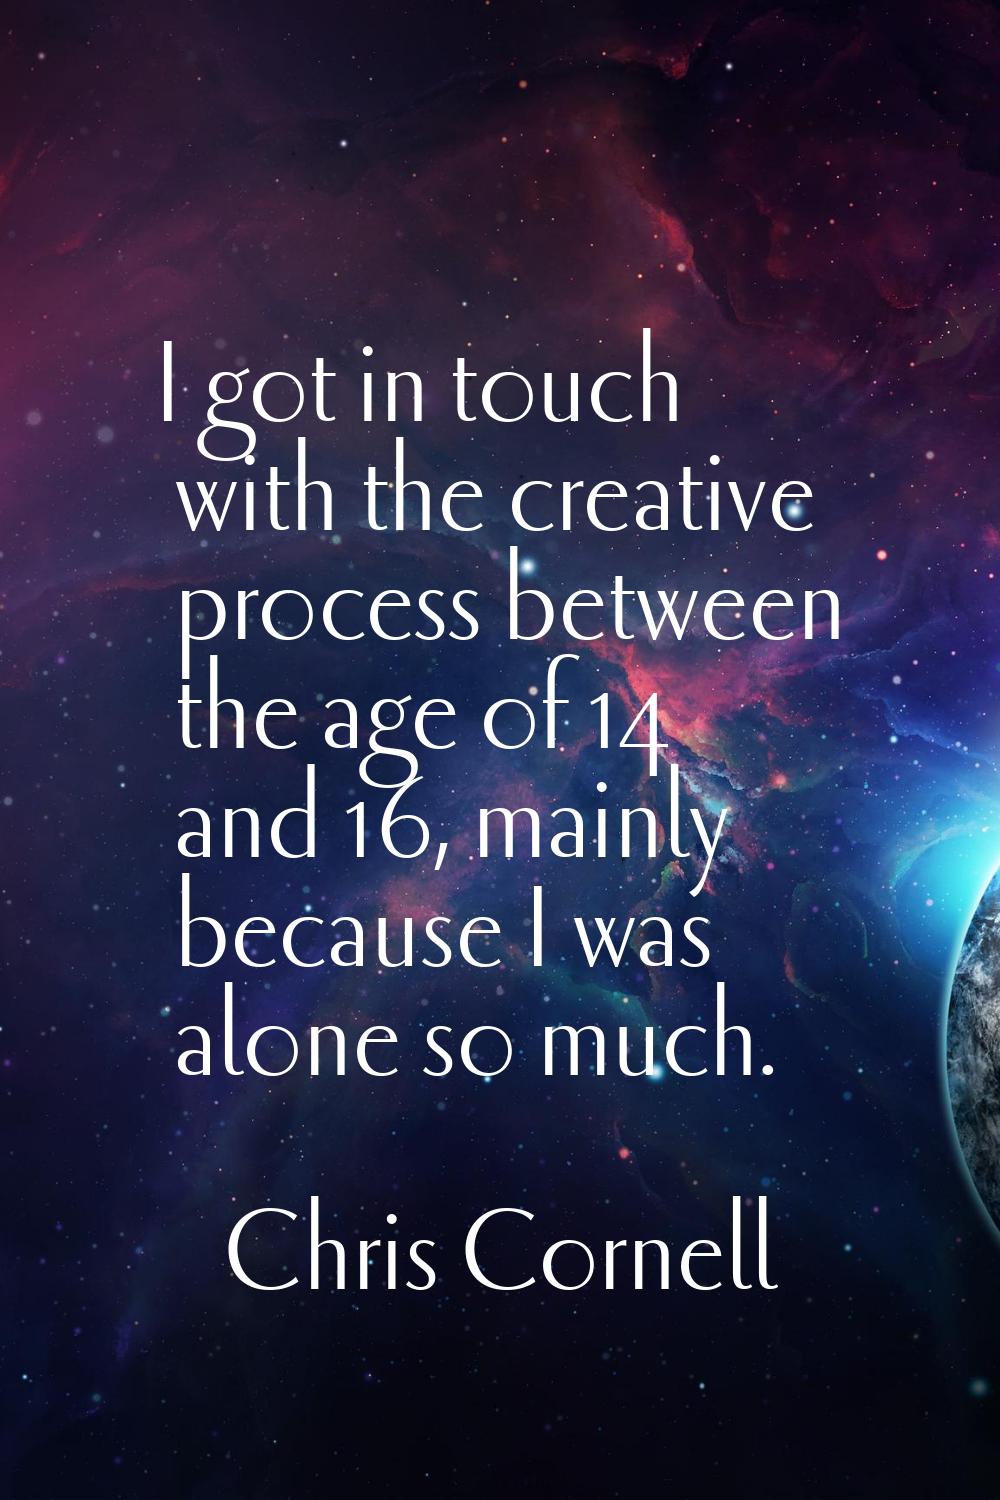 I got in touch with the creative process between the age of 14 and 16, mainly because I was alone s